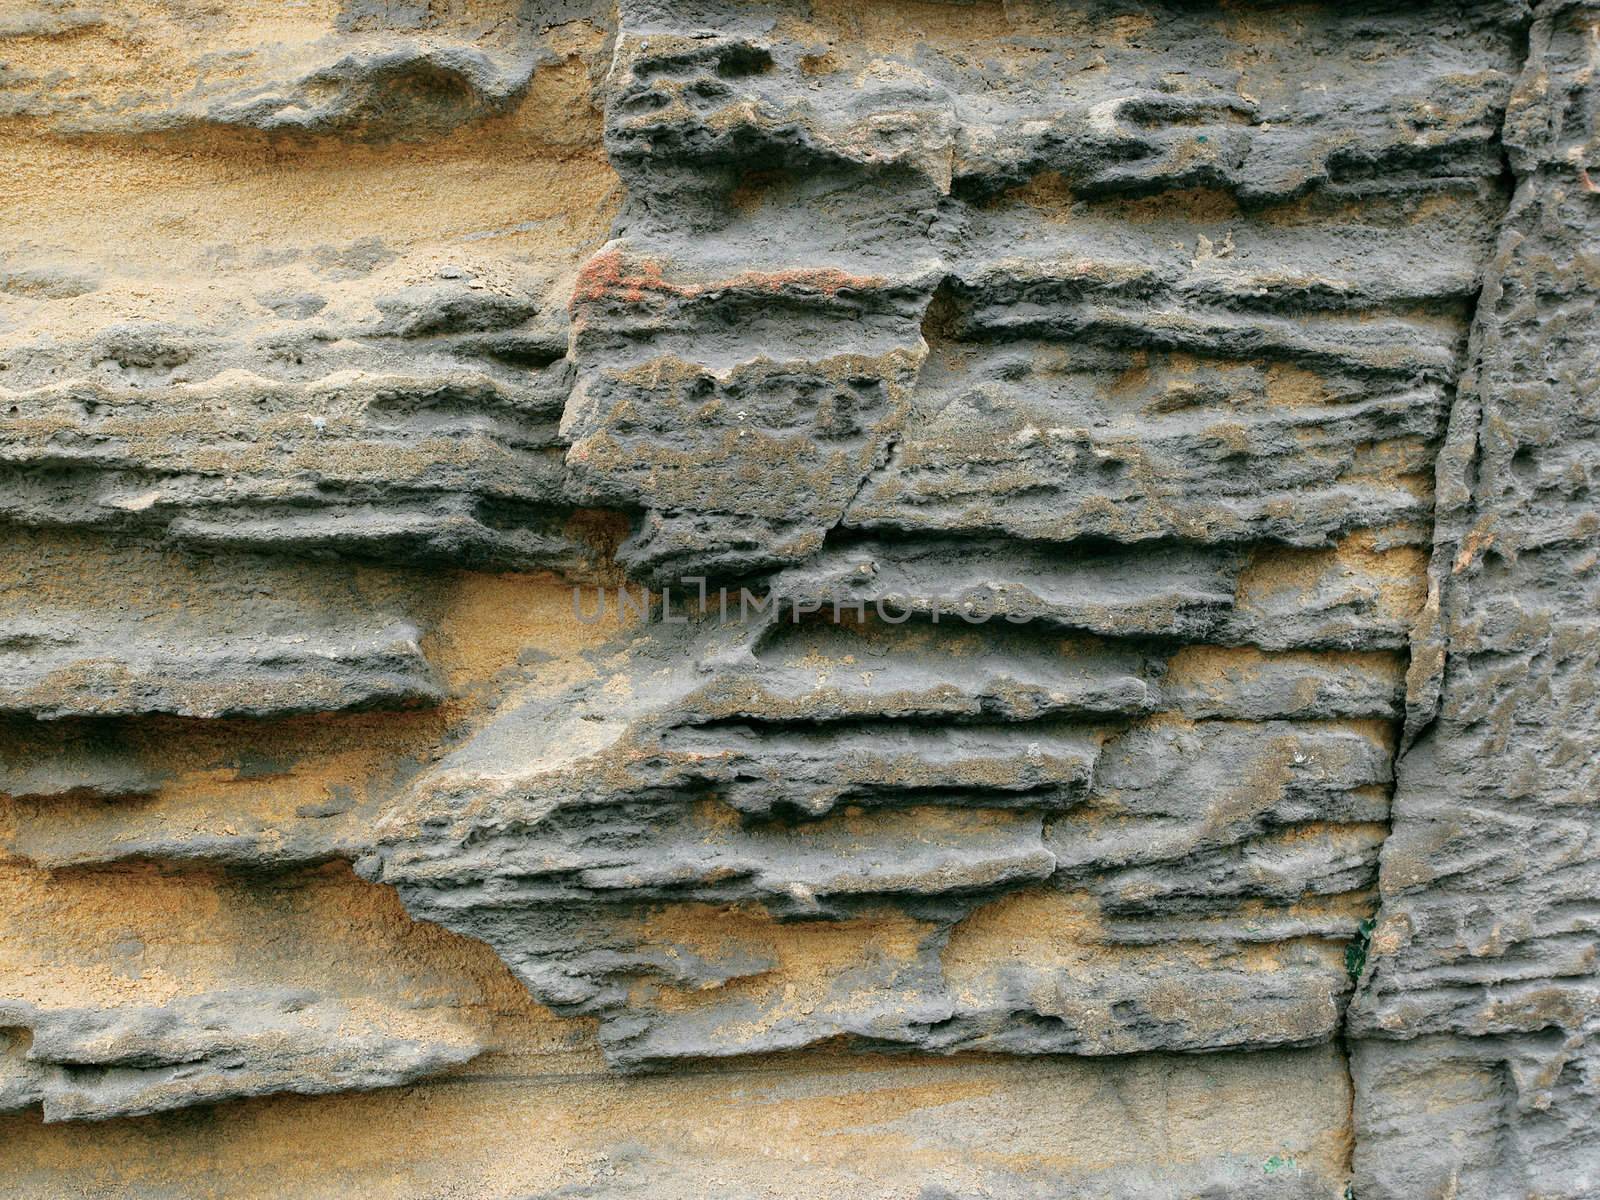 Background image of erosion on a rock wall.
